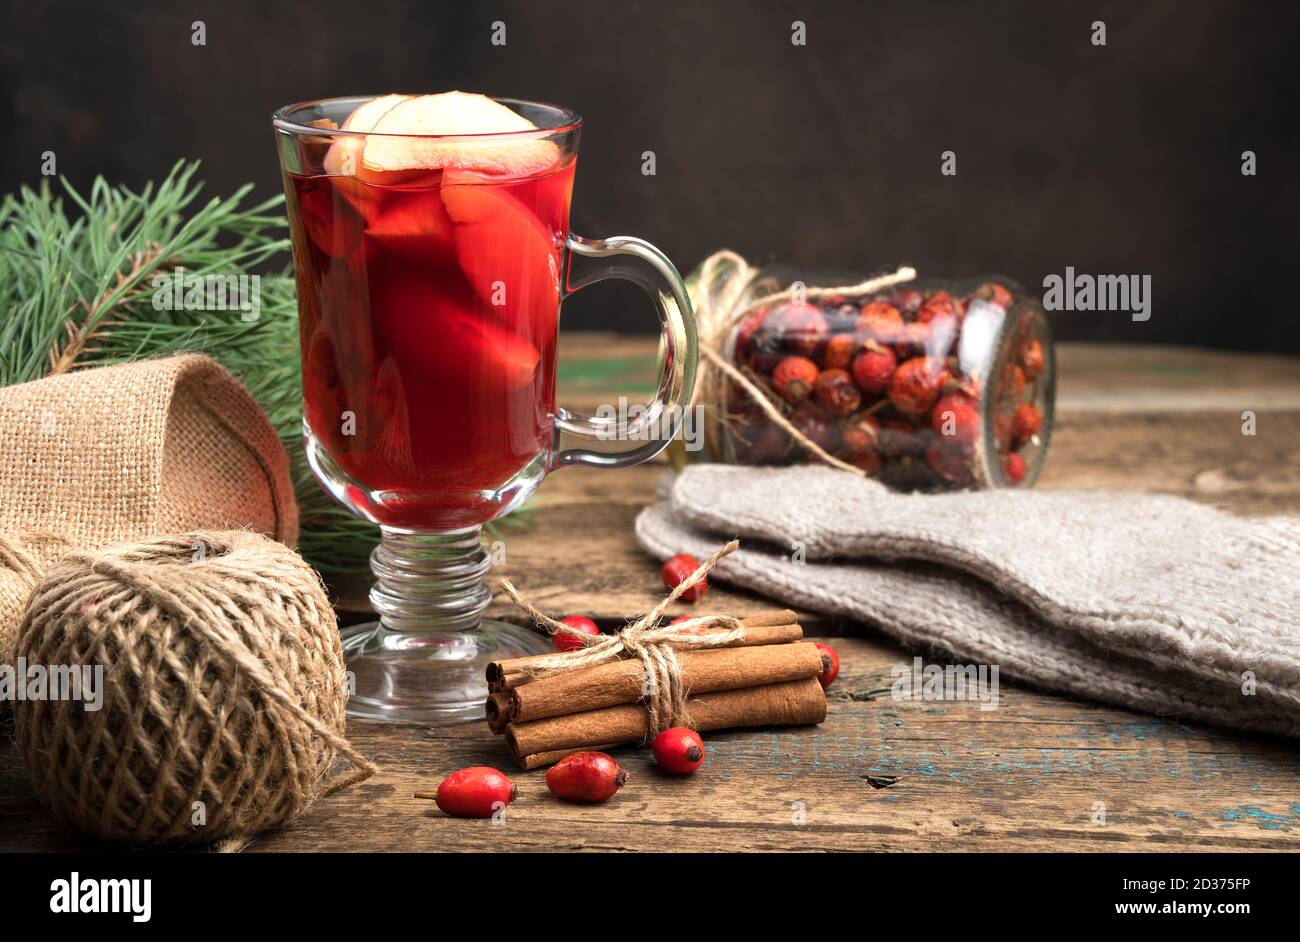 Christmas background with a glass of mulled wine, knitted socks and fir branches on a wooden background. Stock Photo